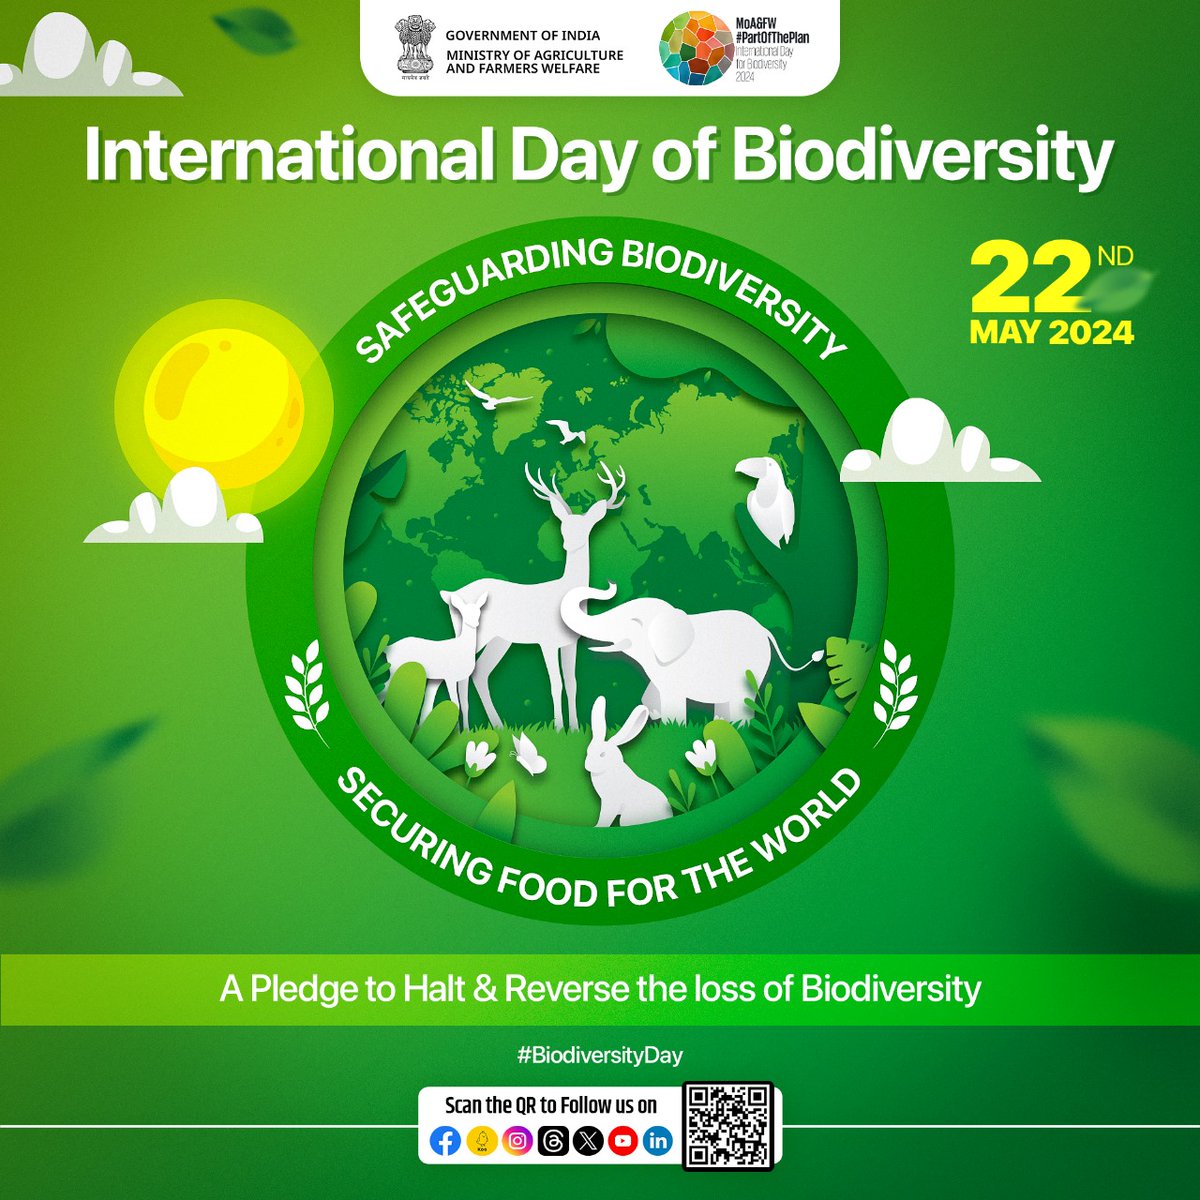 International Day of Biodiversity 2024! “Biodiversity & Agriculture,” seeks to highlight the importance of sustainable agriculture to preserve biodiversity, to ensure that farmers are able to feed the world & maintain agricultural livelihoods #BiodiversityDay #PartOfThePlan